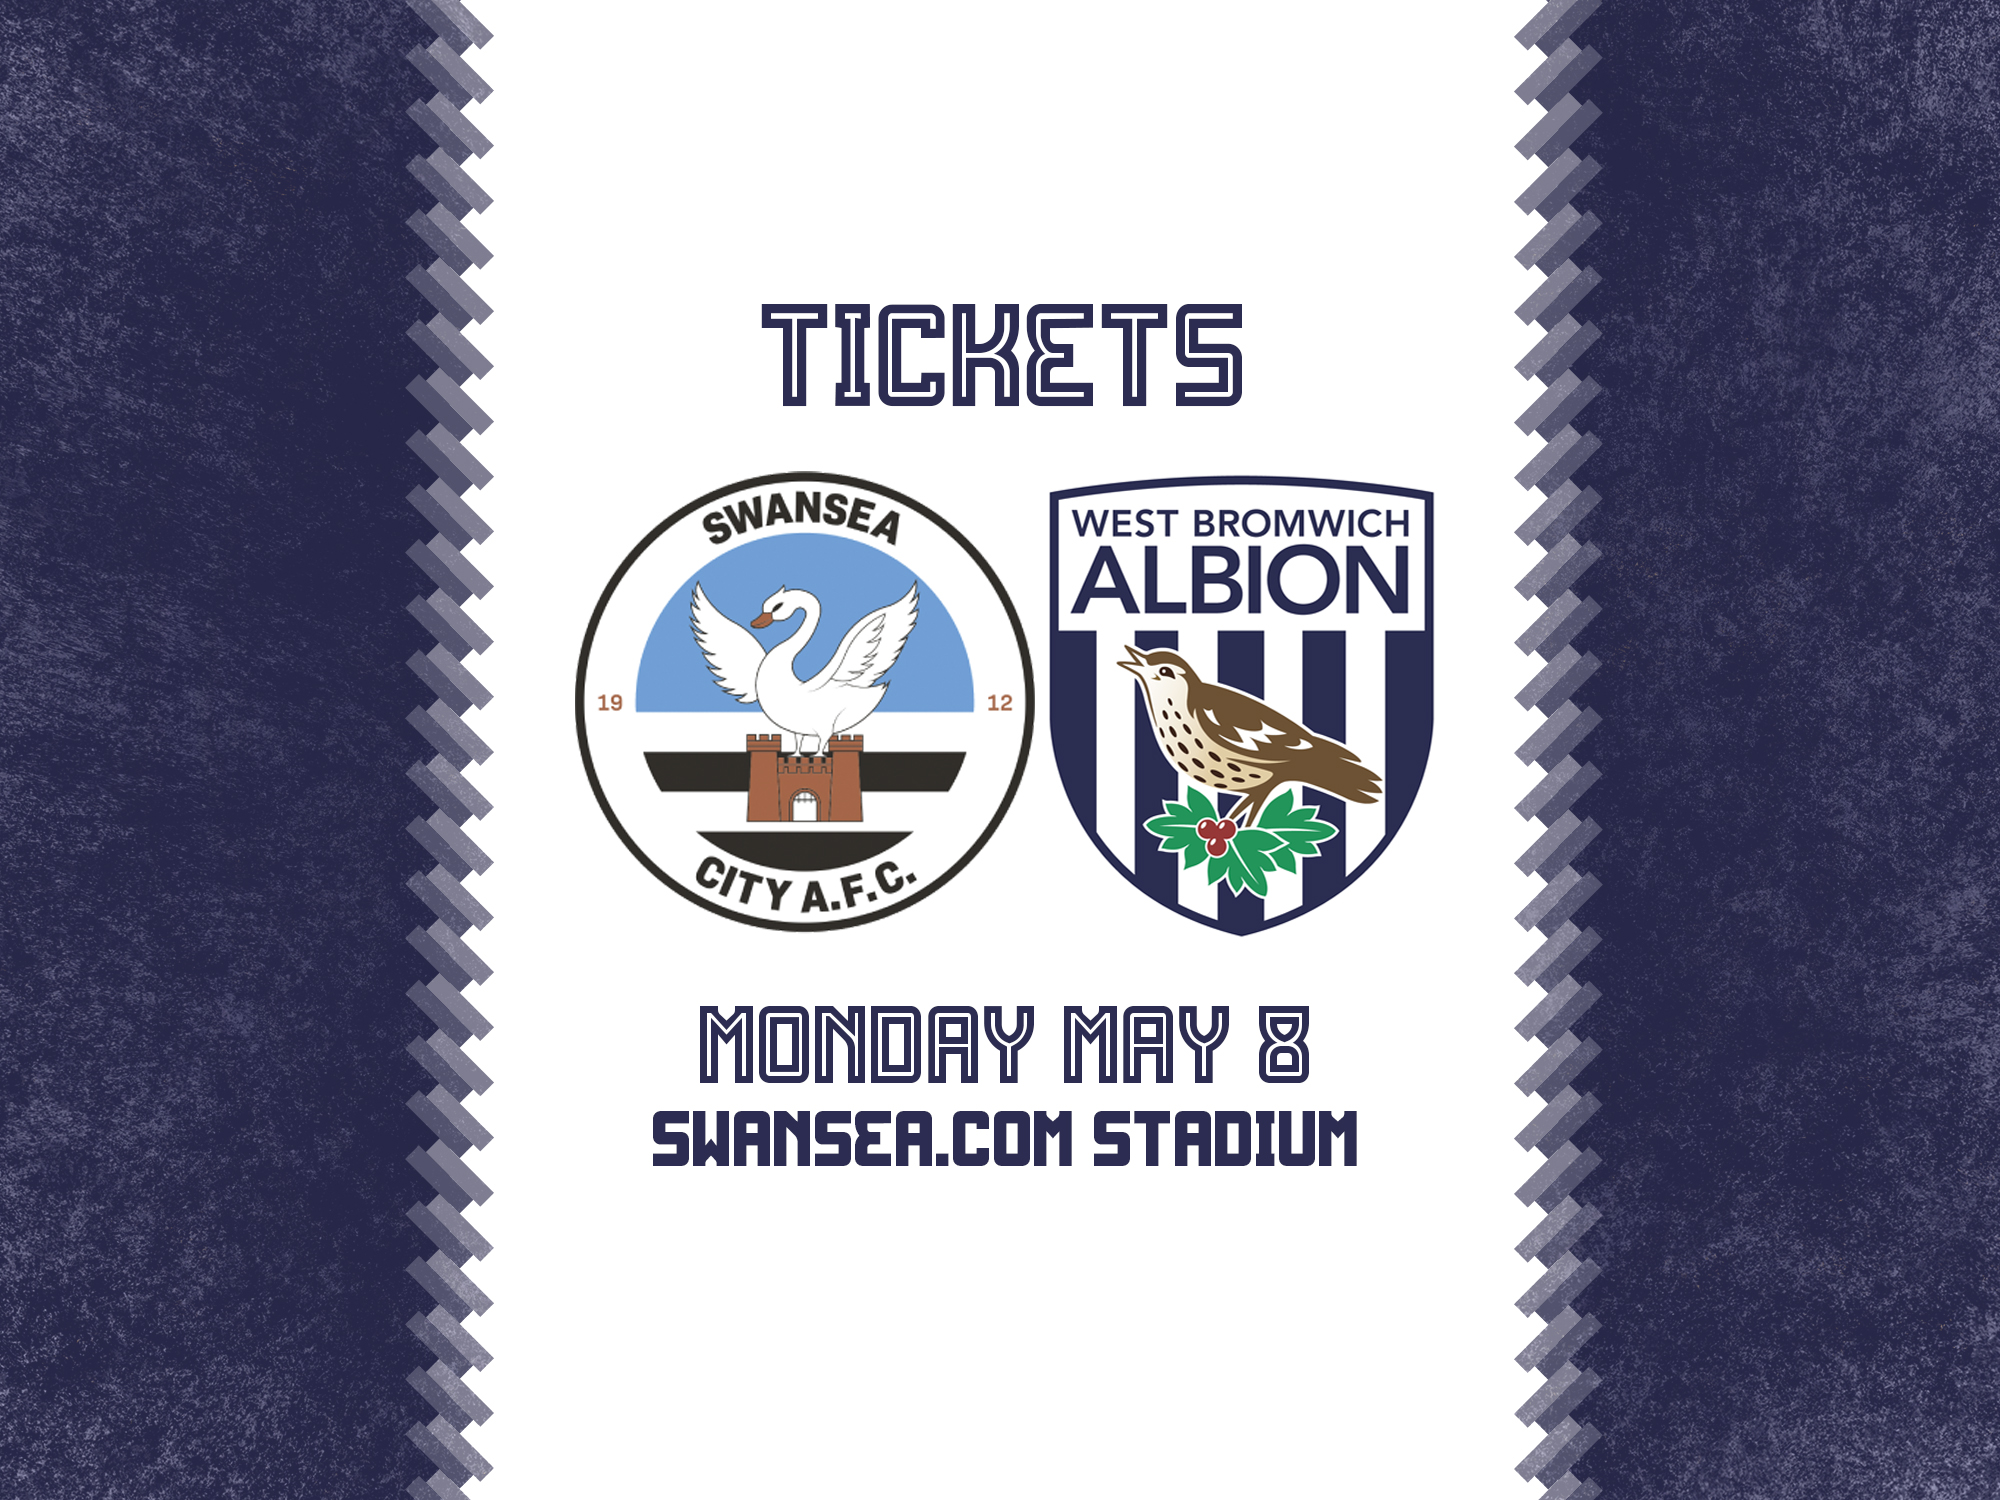 A ticket graphic for Albion's trip to Swansea